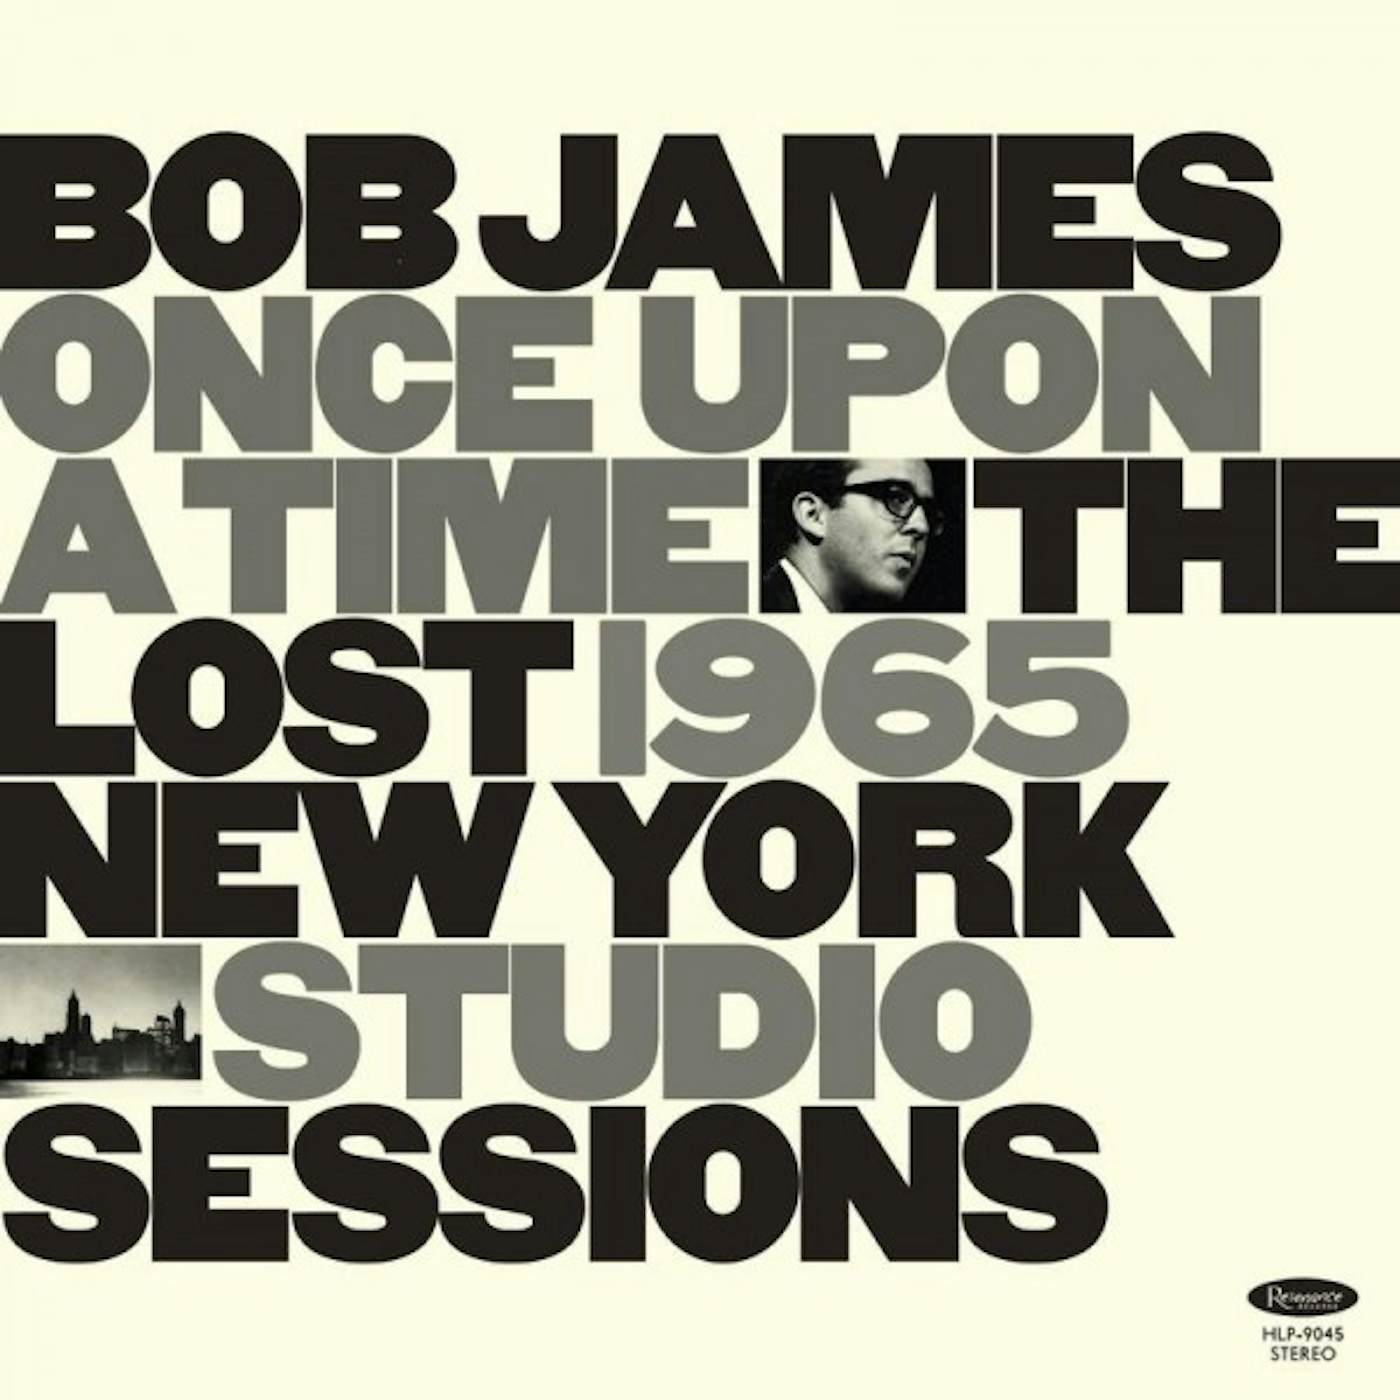 Bob James ONCE UPON A TIME: THE LOST 1965 NEW YORK STUDIO SESSIONS (180G/DELUXE GATEFOLD/INTERVIEW BY JAMES) Vinyl Record